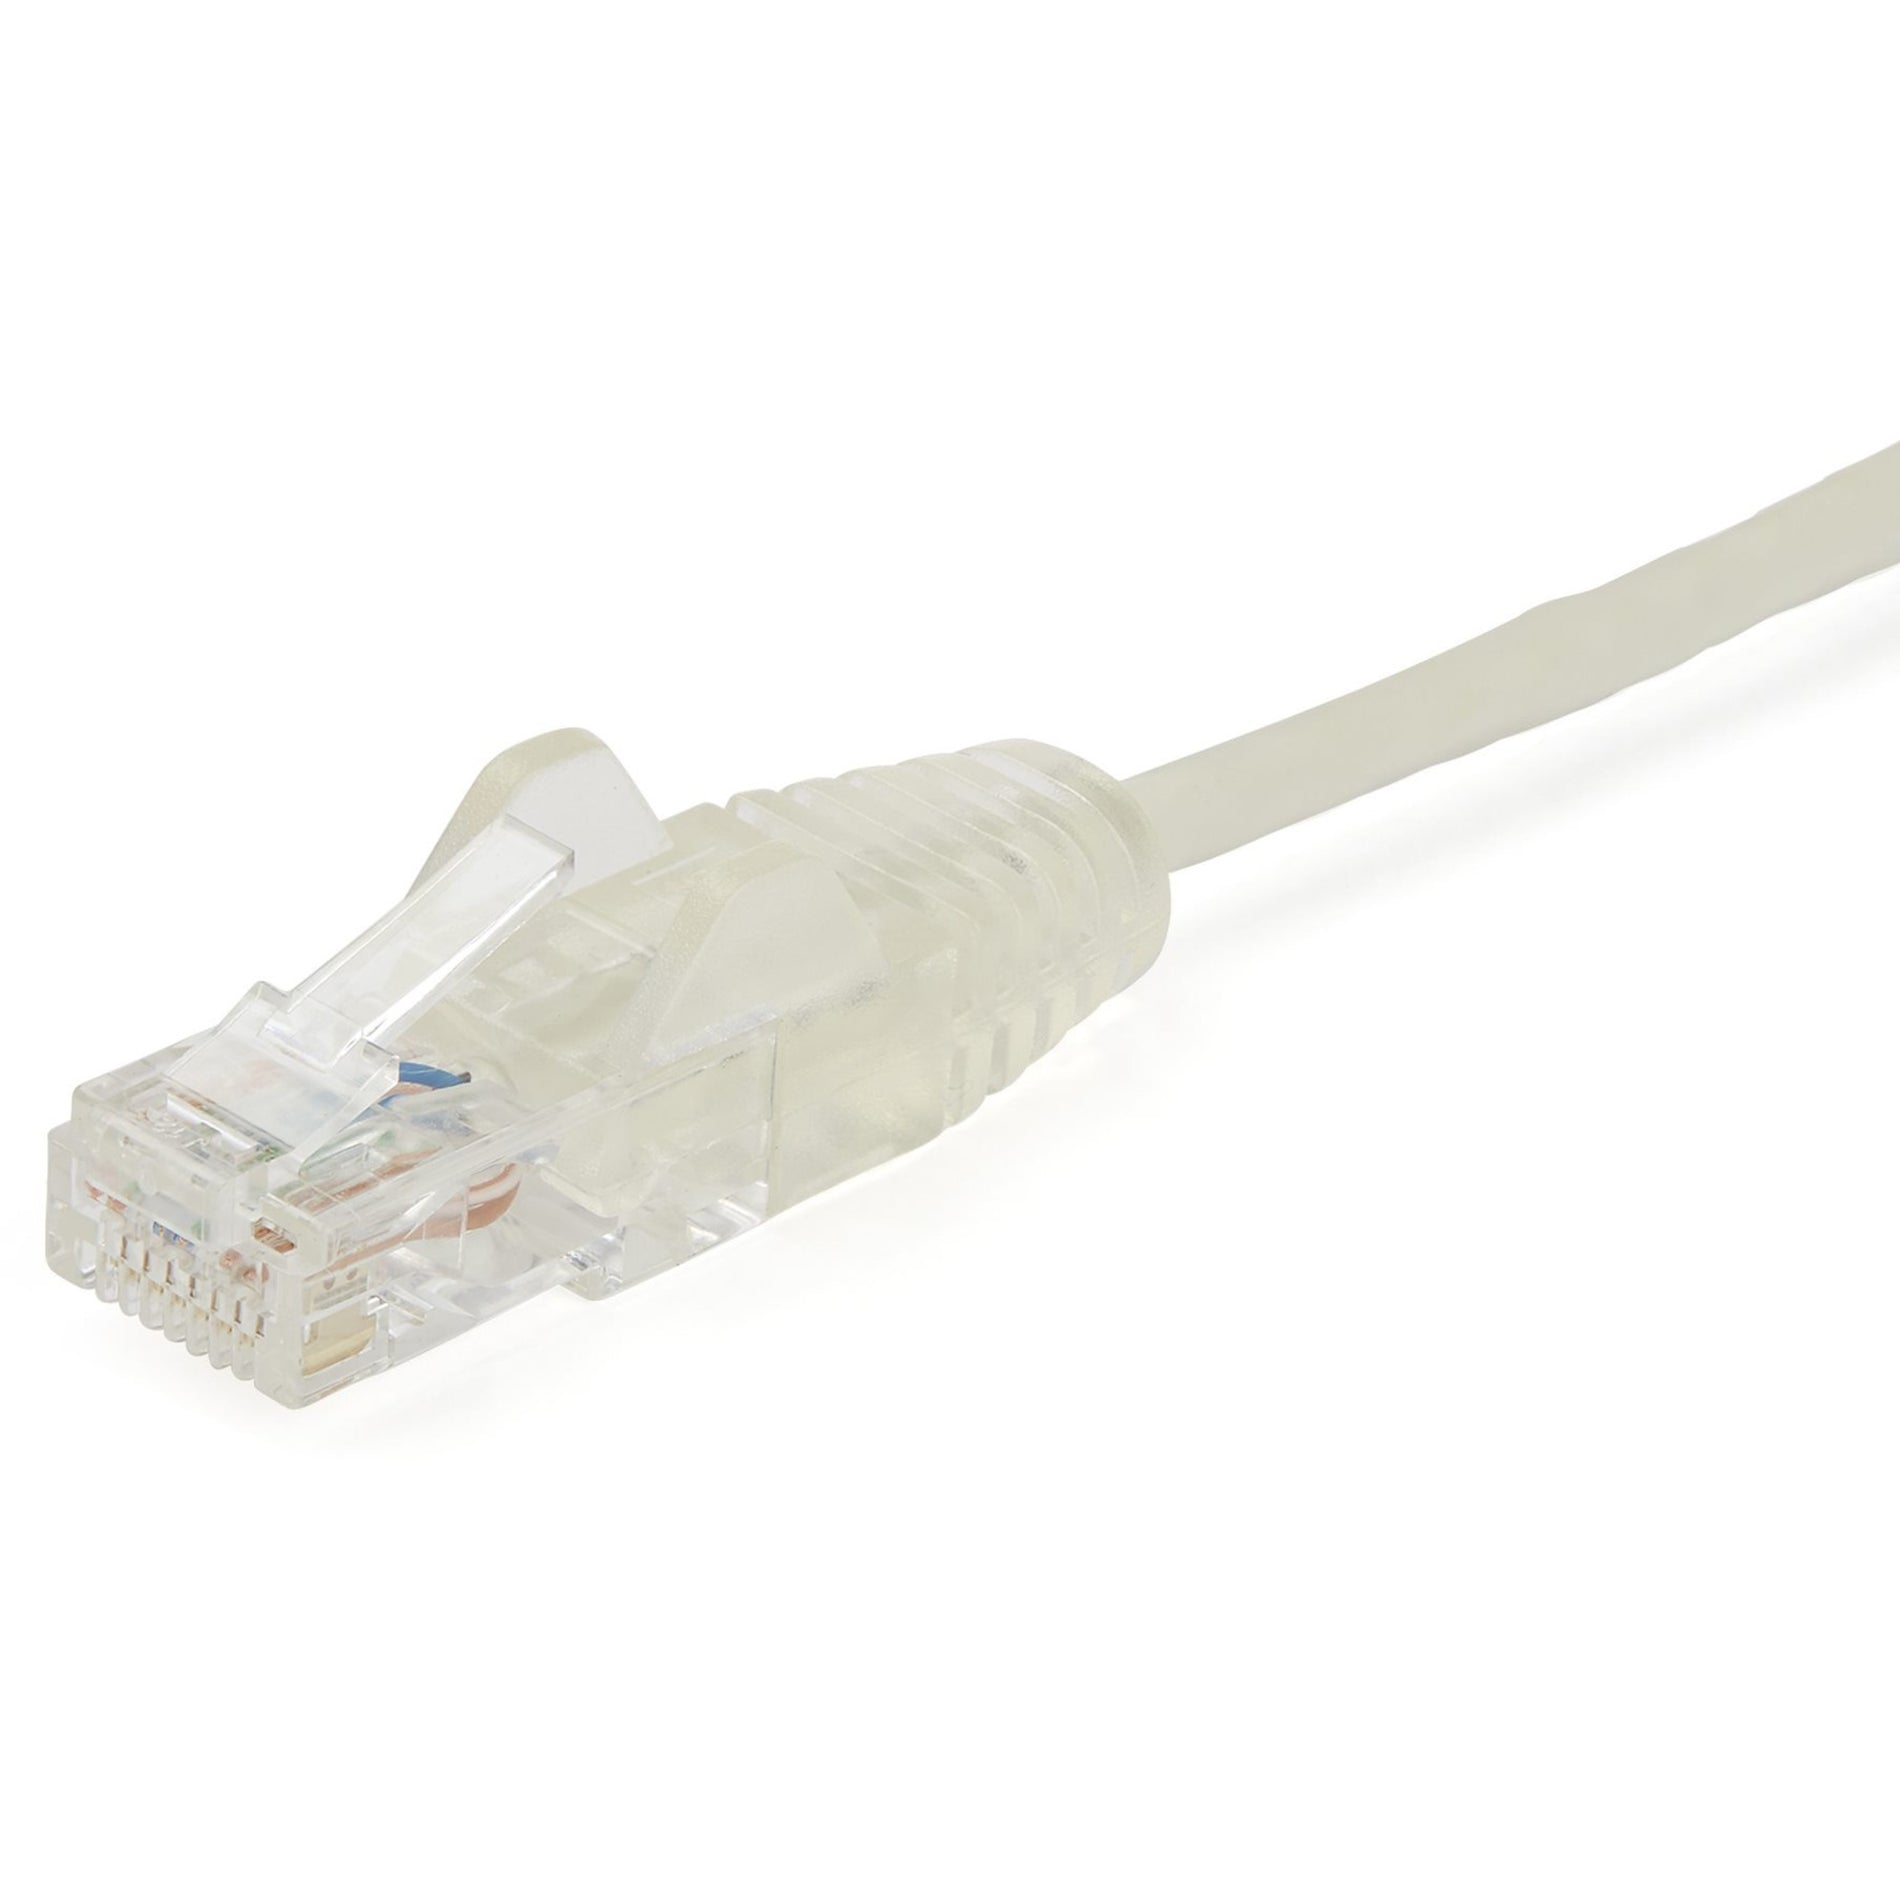 StarTech.com N6PAT6INGRS Cat.6 Patch Network Cable, 6 in Gray - Slim, Snagless RJ45 Connectors, Cat6 Cable, Cat6 Patch Cable, Cat6 Network Cable